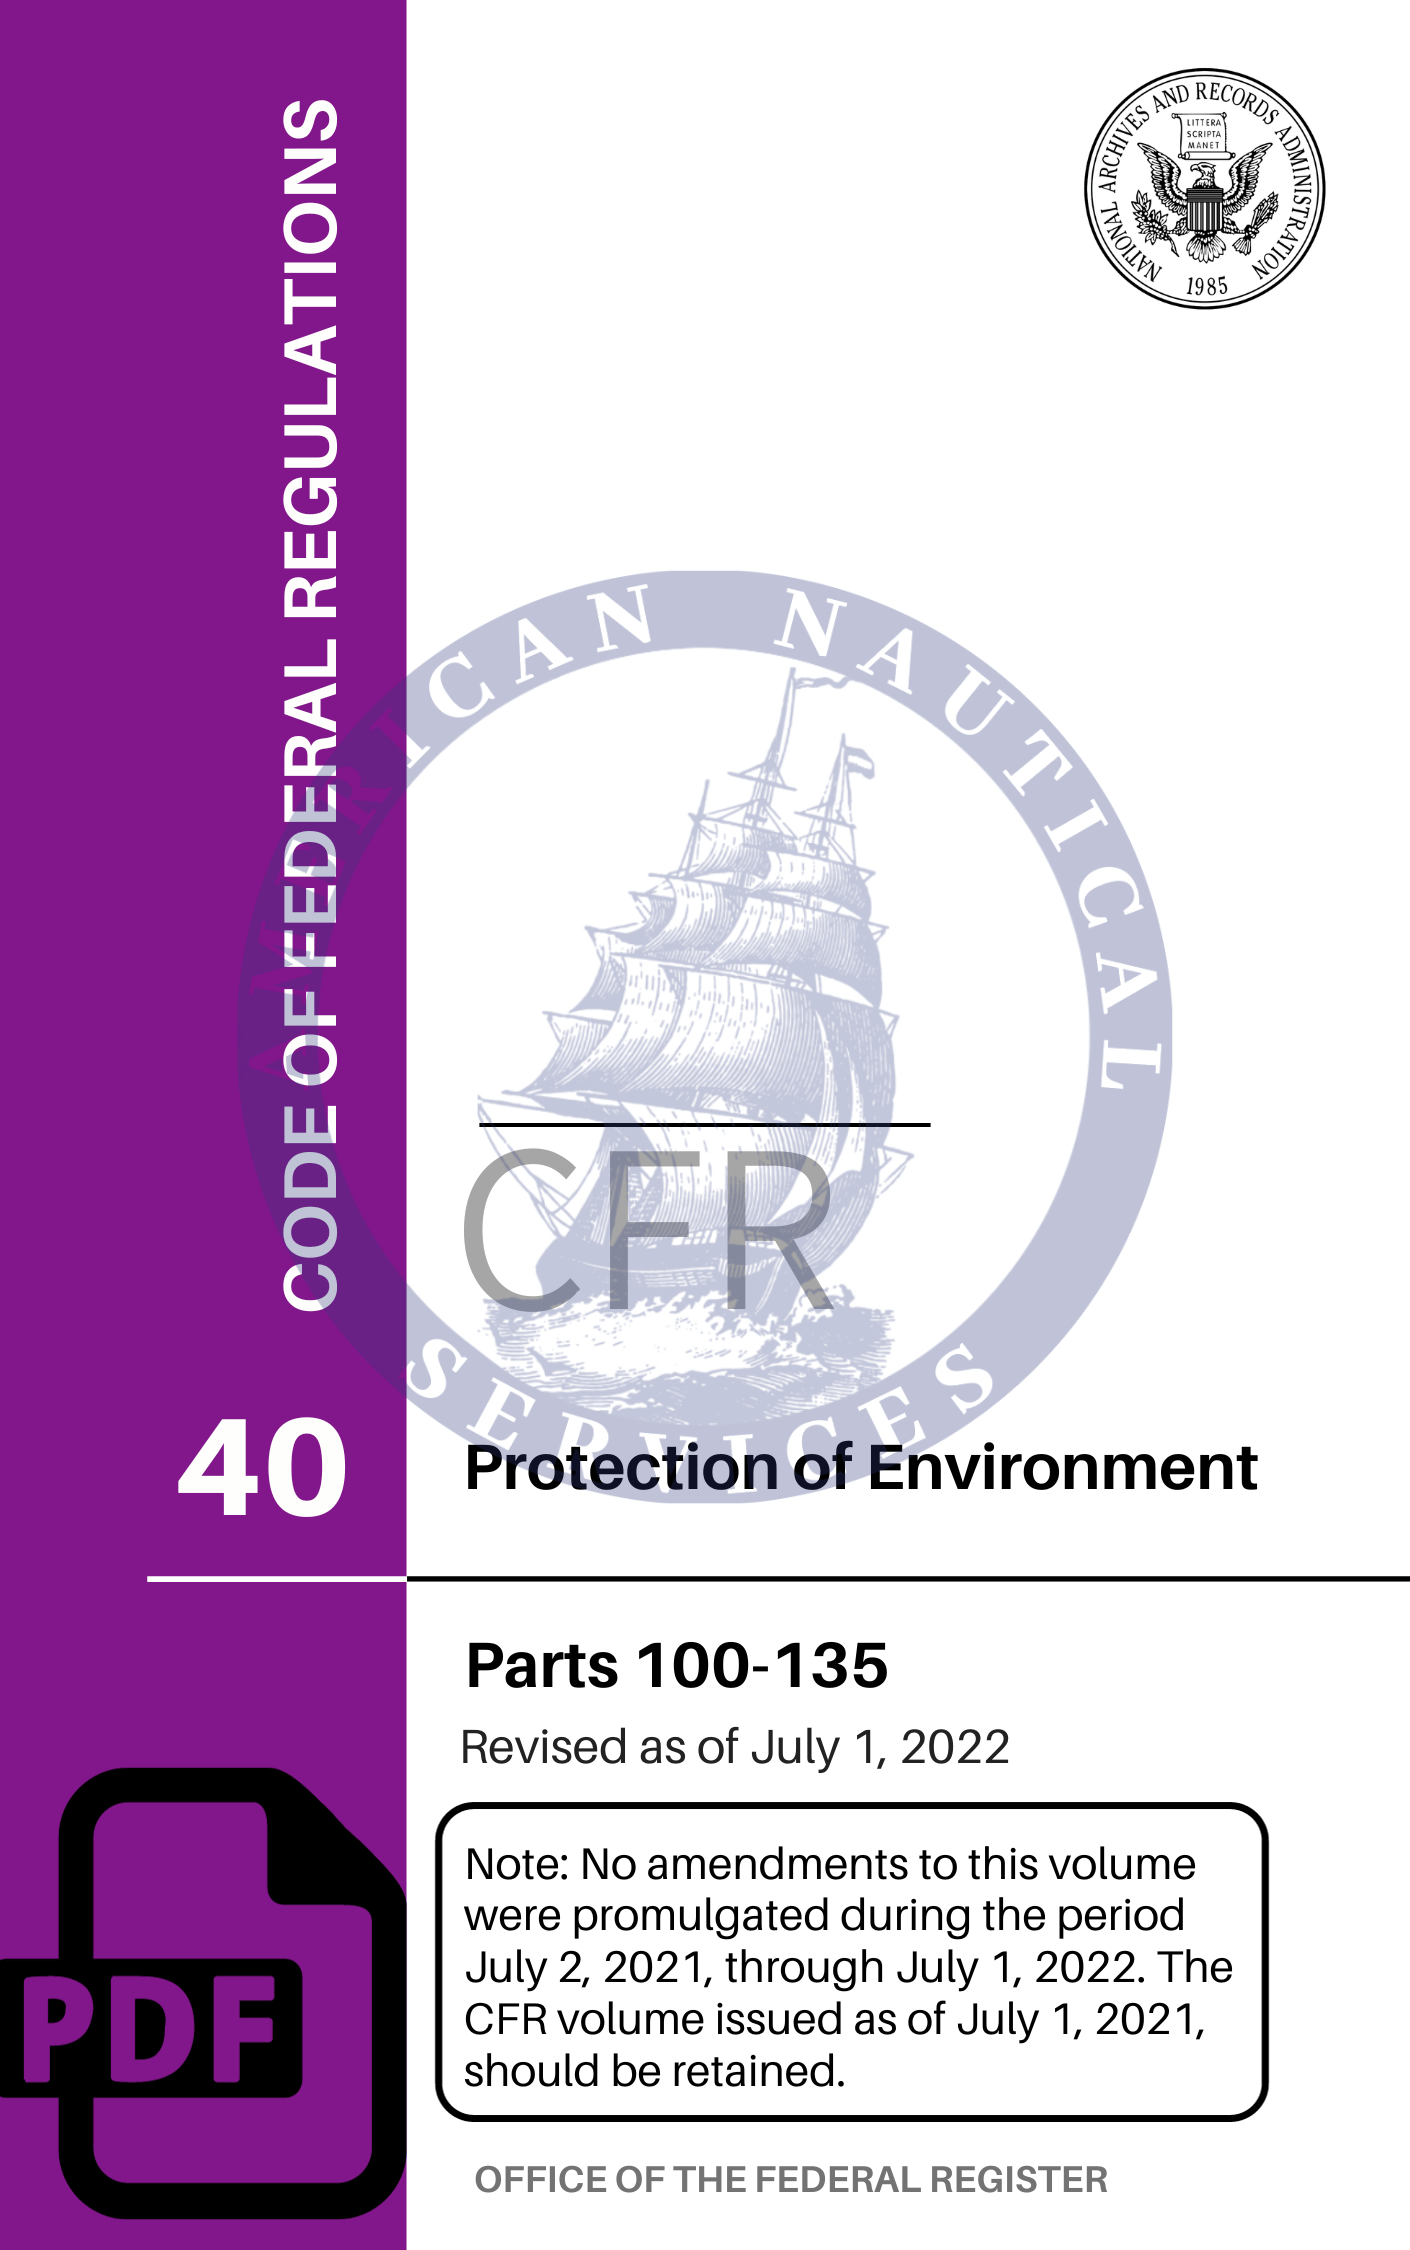 CFR Title 40: Parts 100-135 - Protection of Environment (Code of Federal Regulations), 2022 Edition